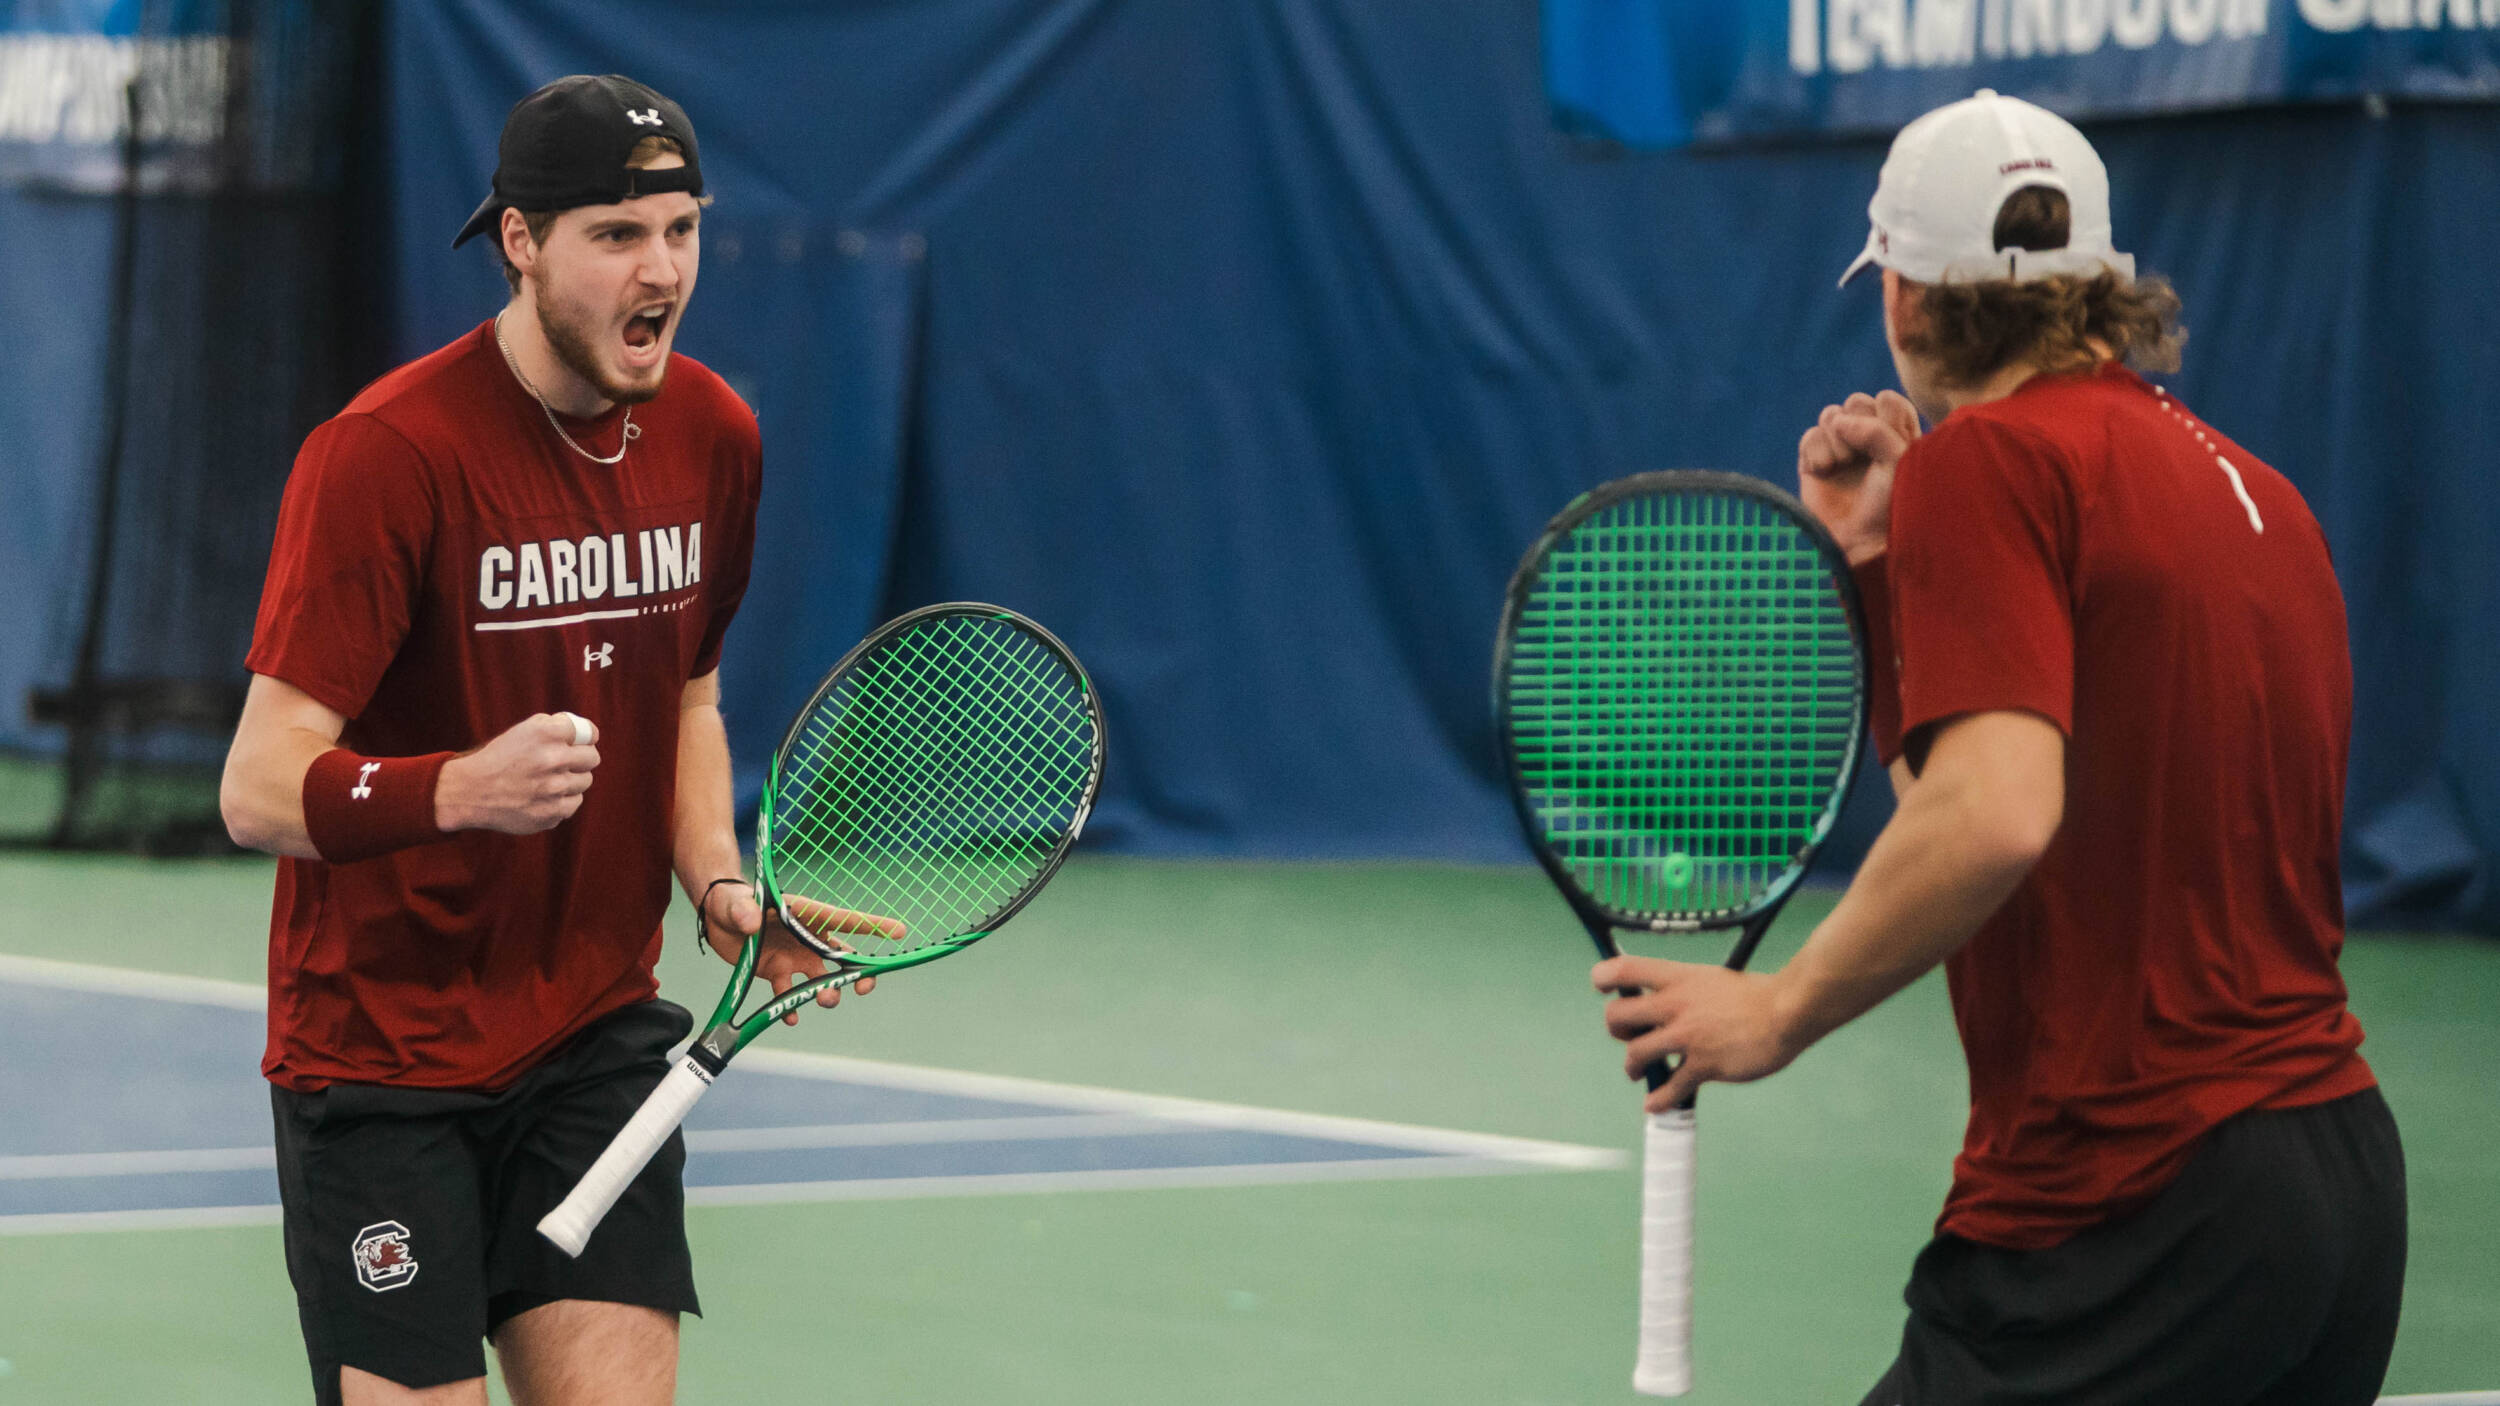 Samuel and Hoole Record Top-15 Doubles Upset in Win Over No. 20 Arizona State